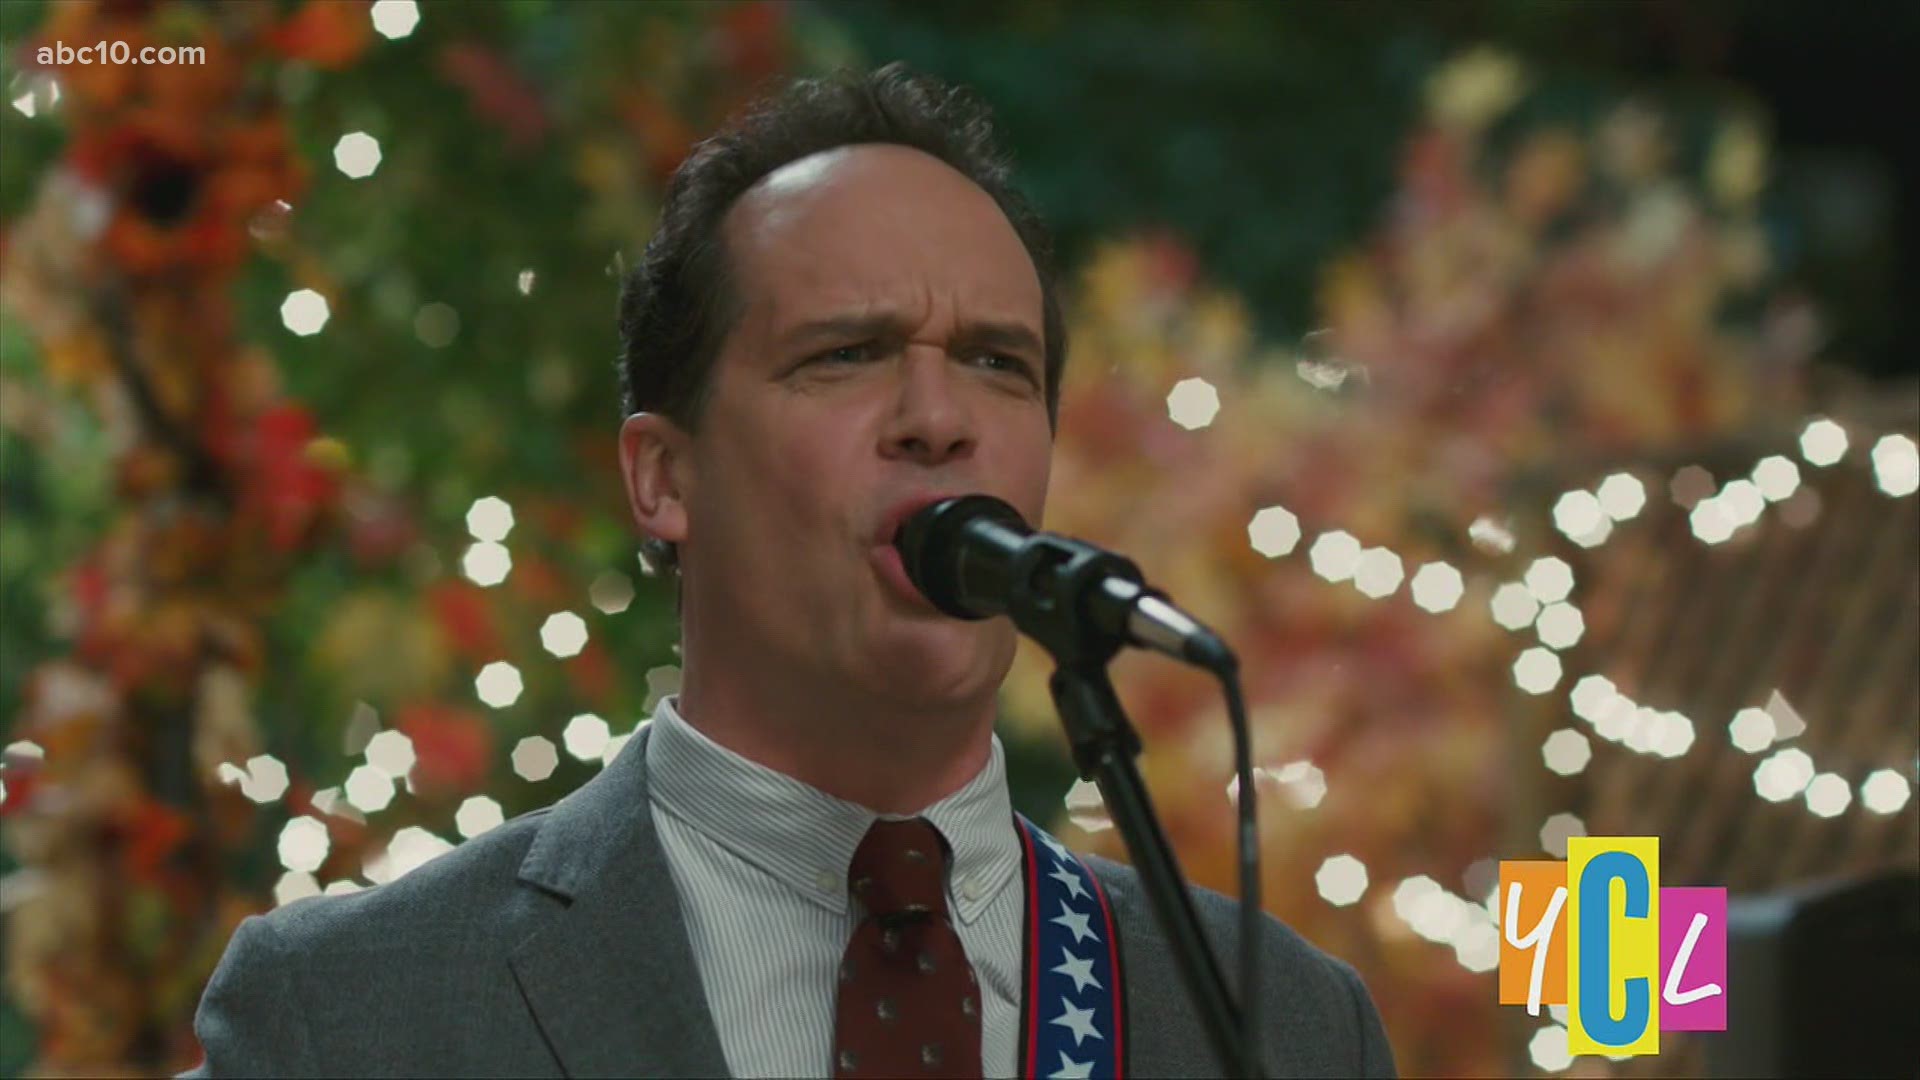 Actor Diedrich Bader shares what fans can expect on the new season of "American Housewife," special guests stars and the sitcom reaching 100 episodes.